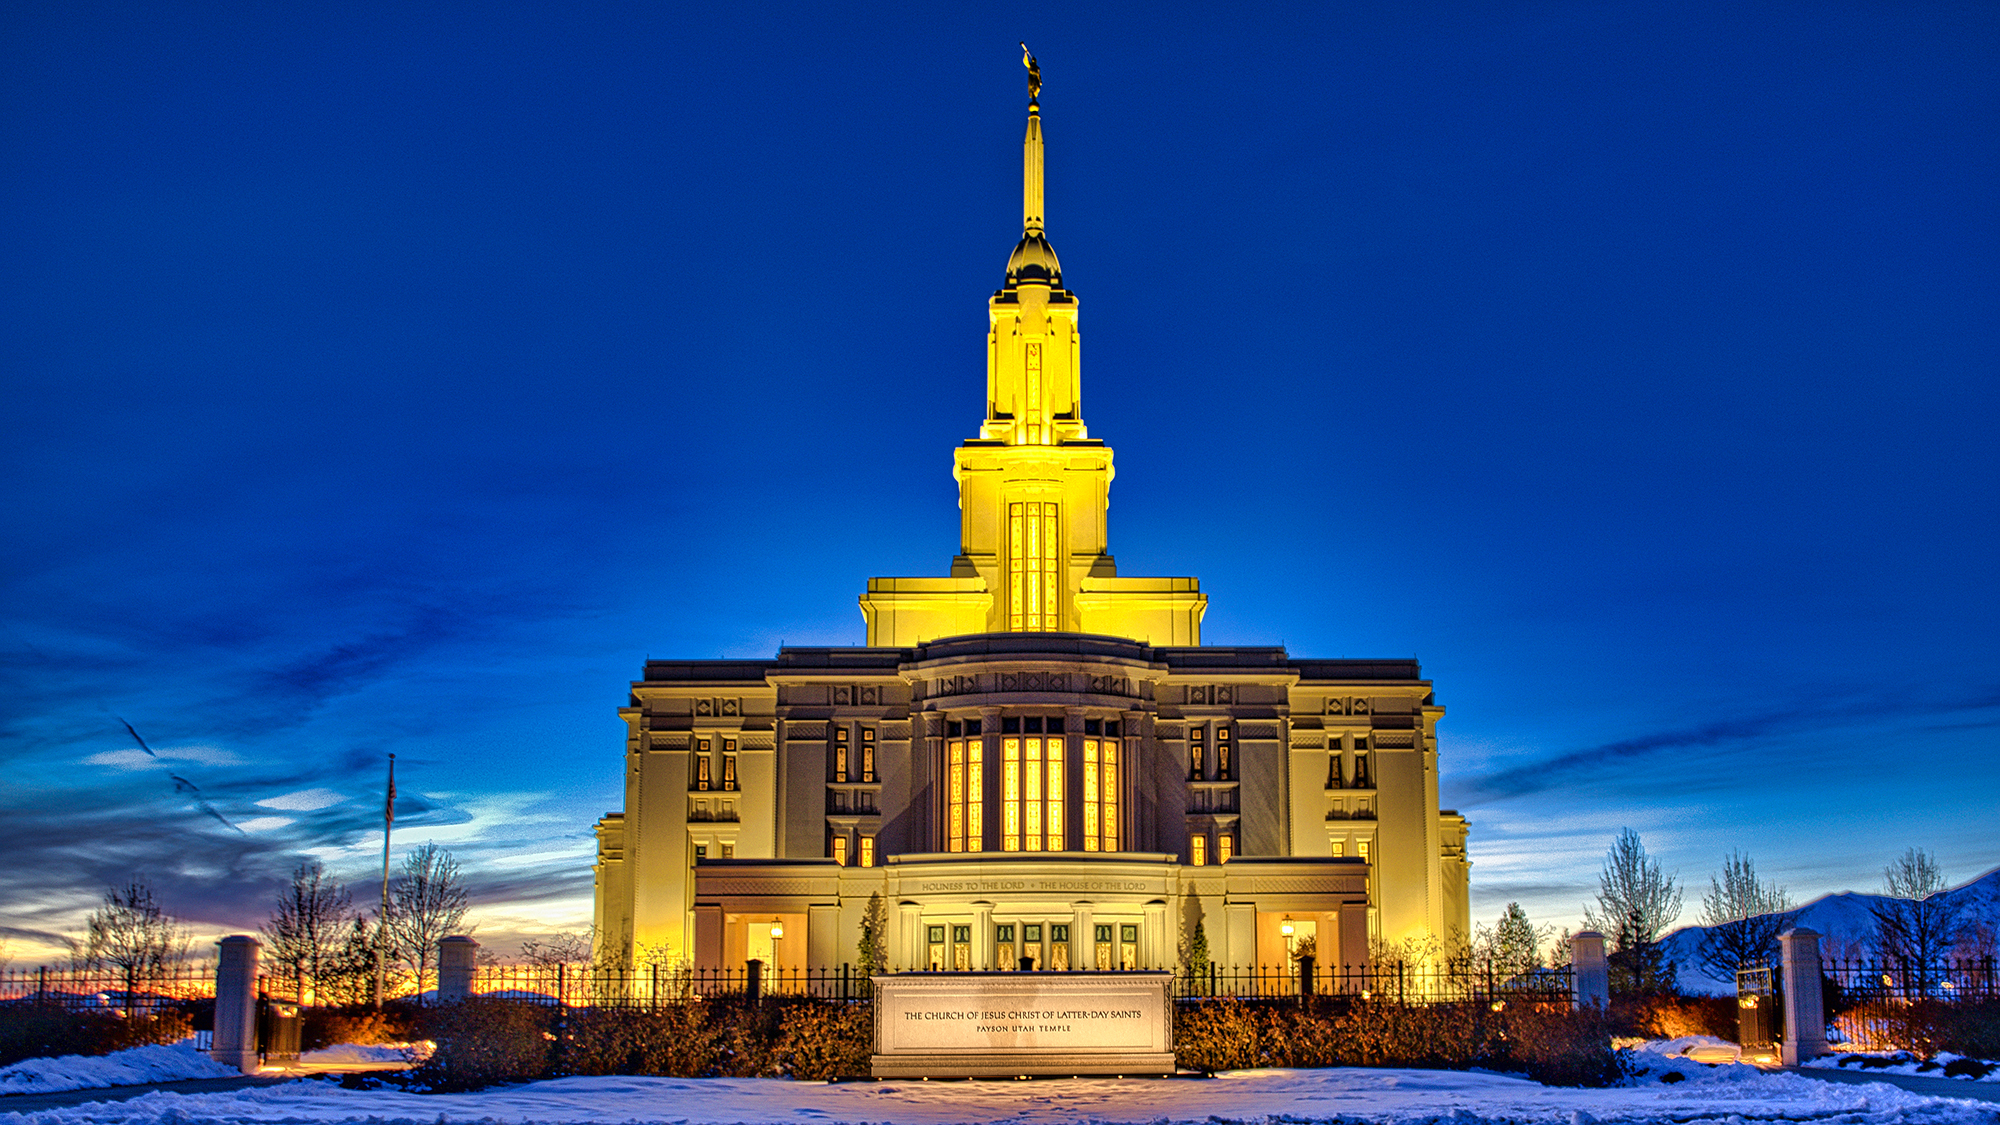 The Payson Temple of the Church of Jesus Christ of Latter-day Saints